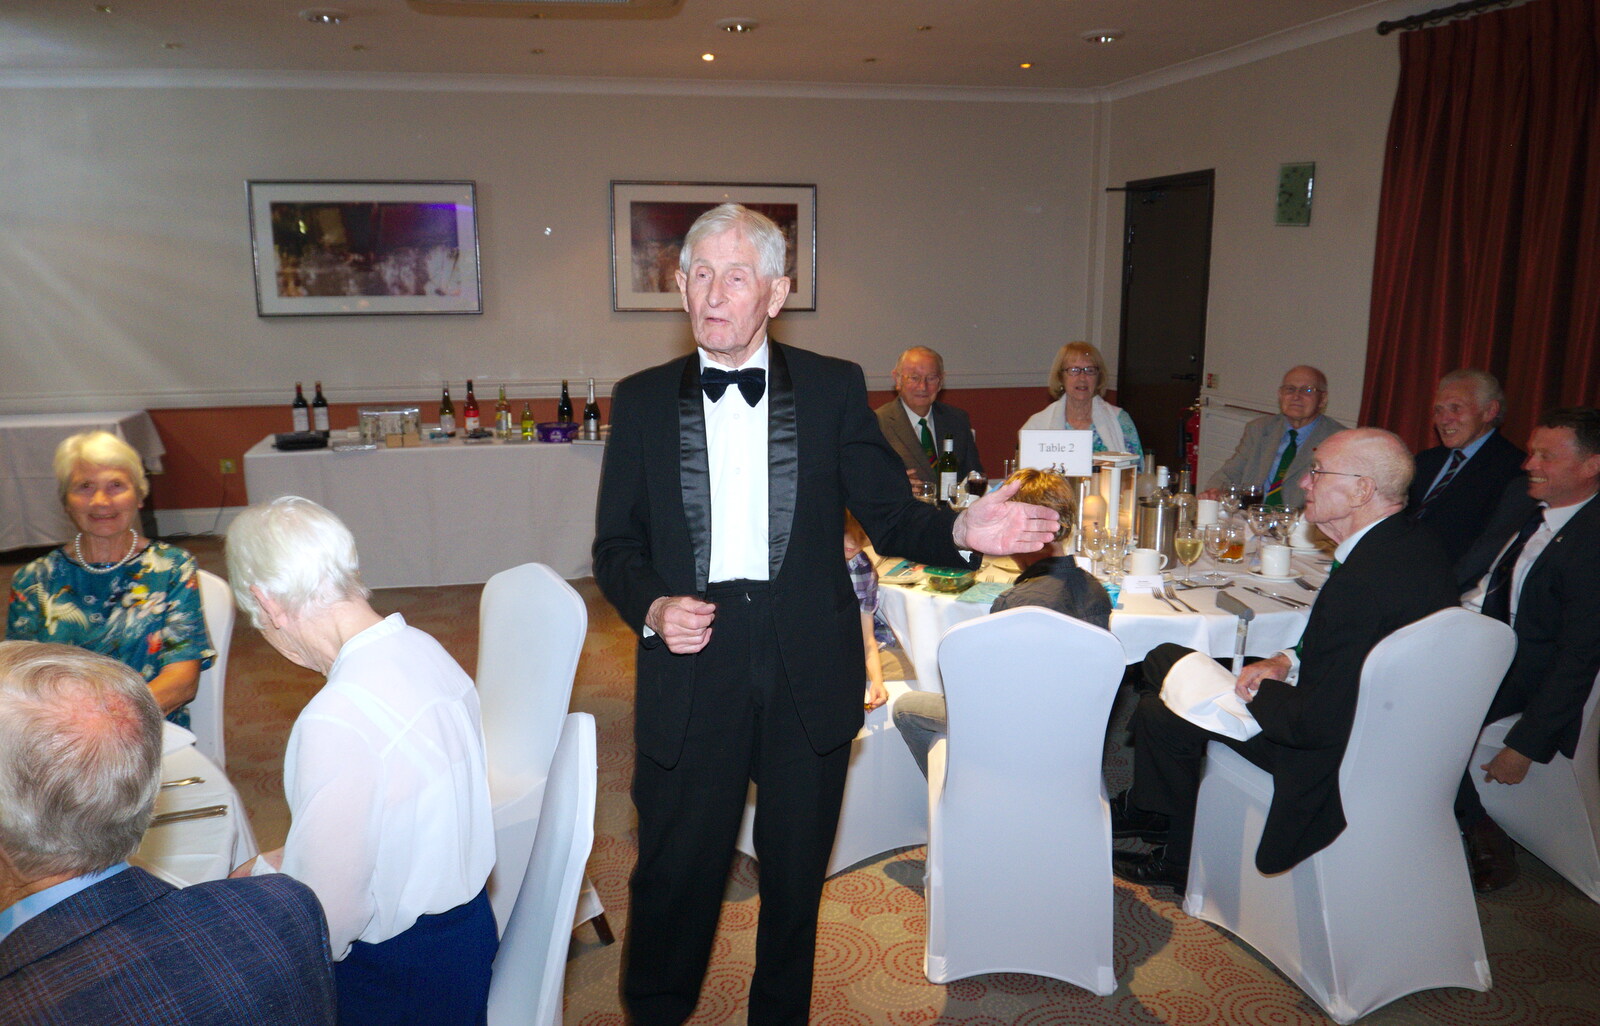 The speech continues from Kenilworth Castle and the 69th Entry Reunion Dinner, Stratford, Warwickshire - 14th September 2019